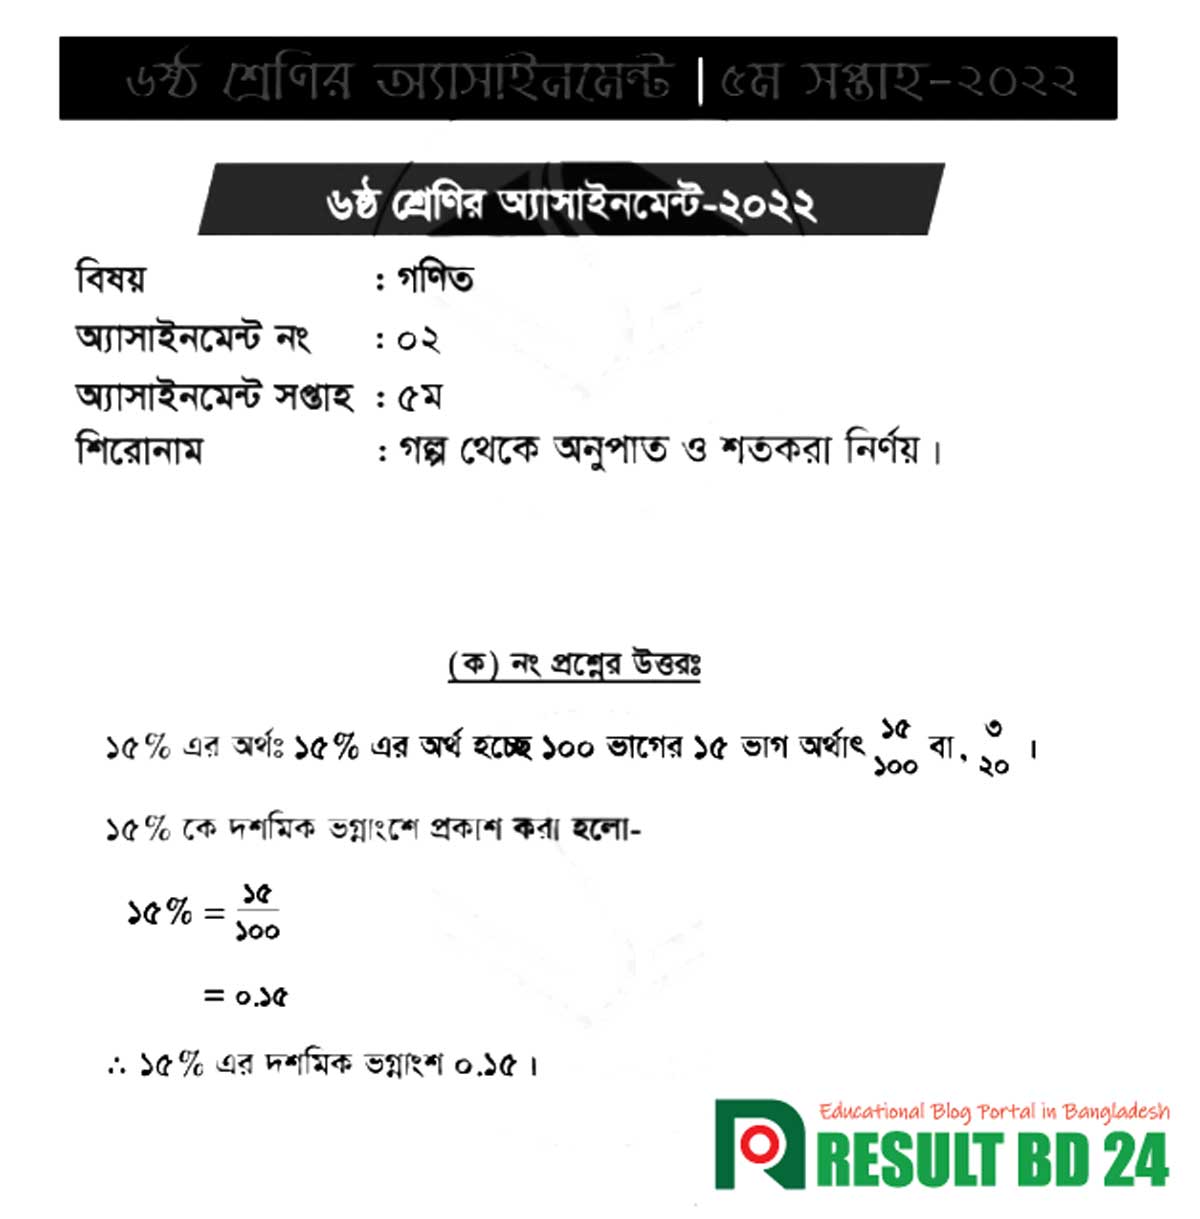 01 Class 6 5th Week Assignment Answer 2022 Math, Science